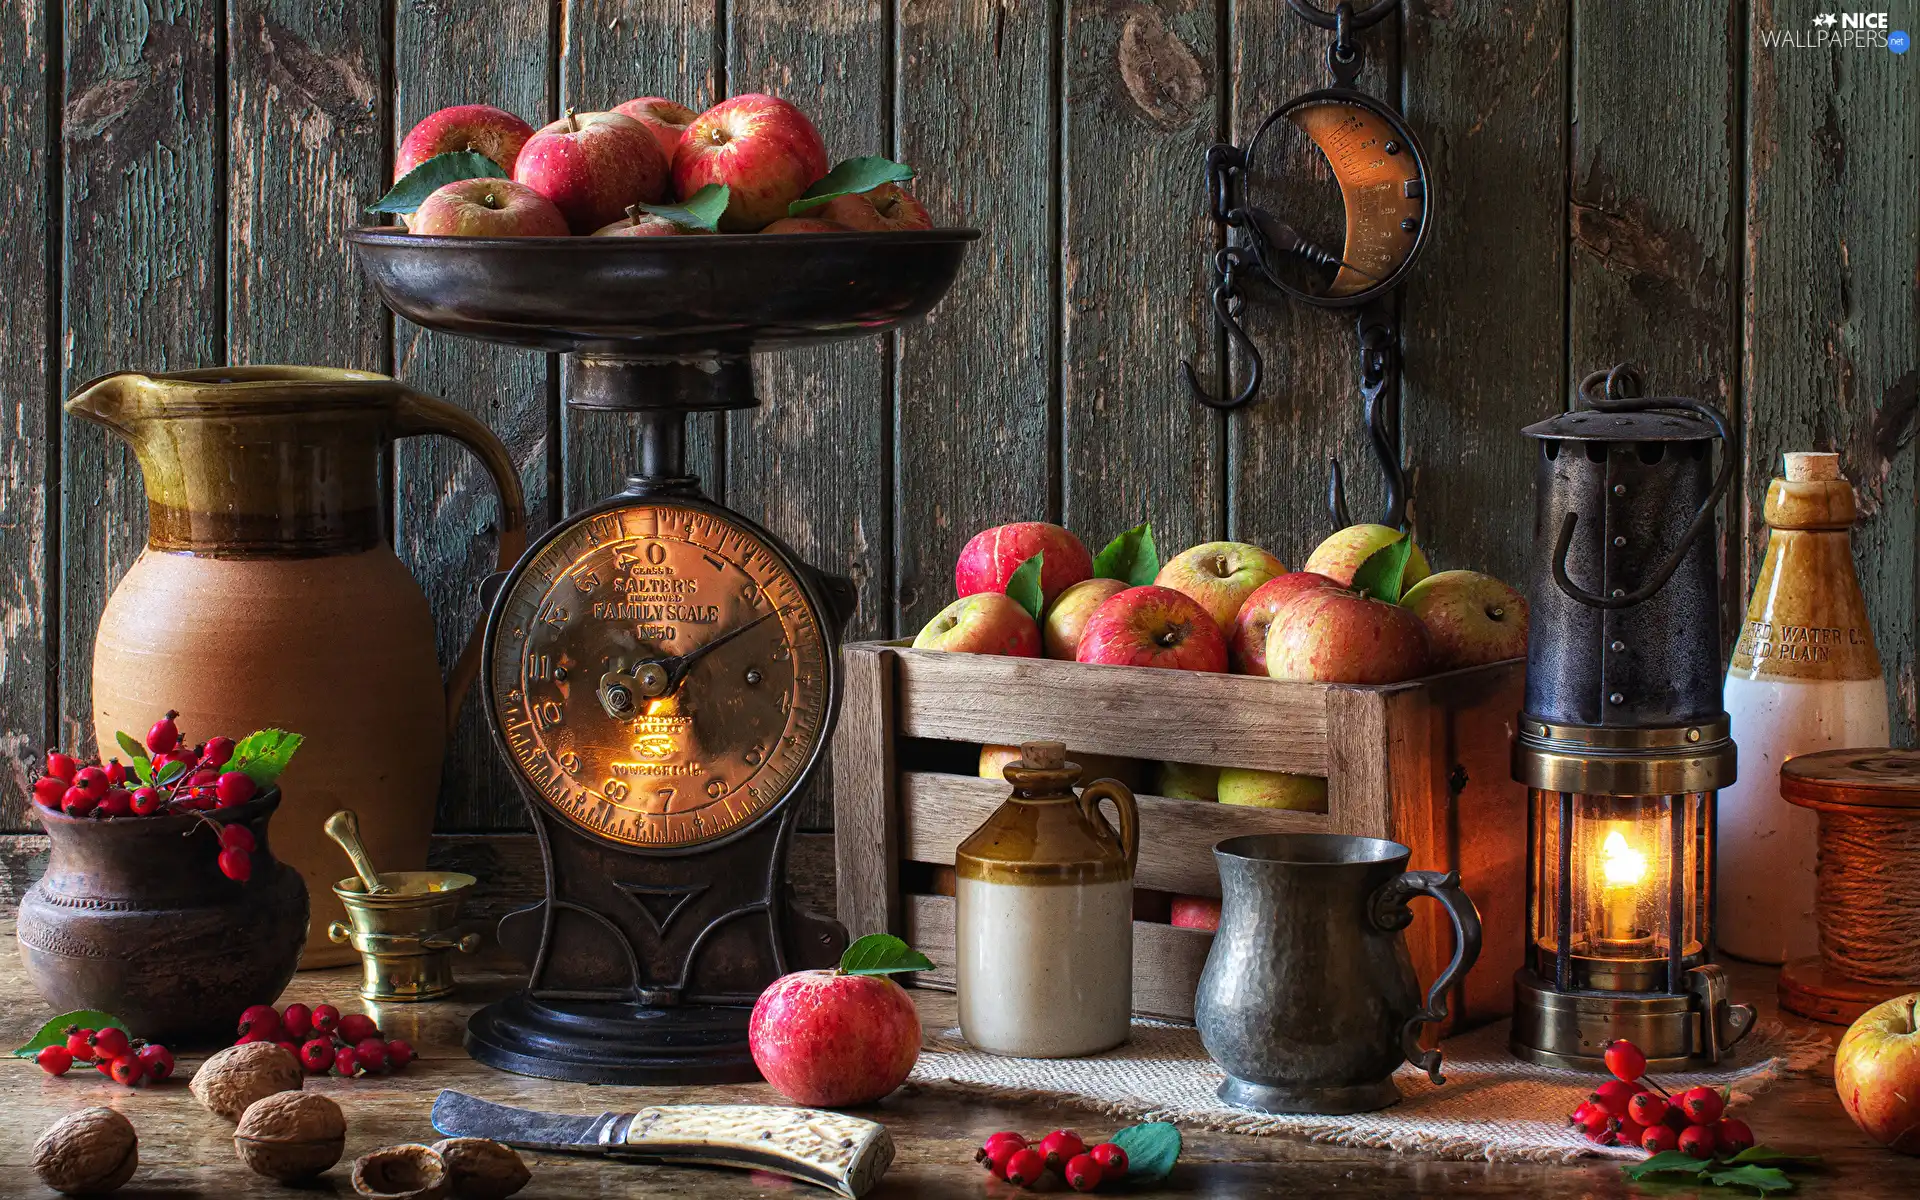 weight, composition, Lamp, apples, box, pitcher